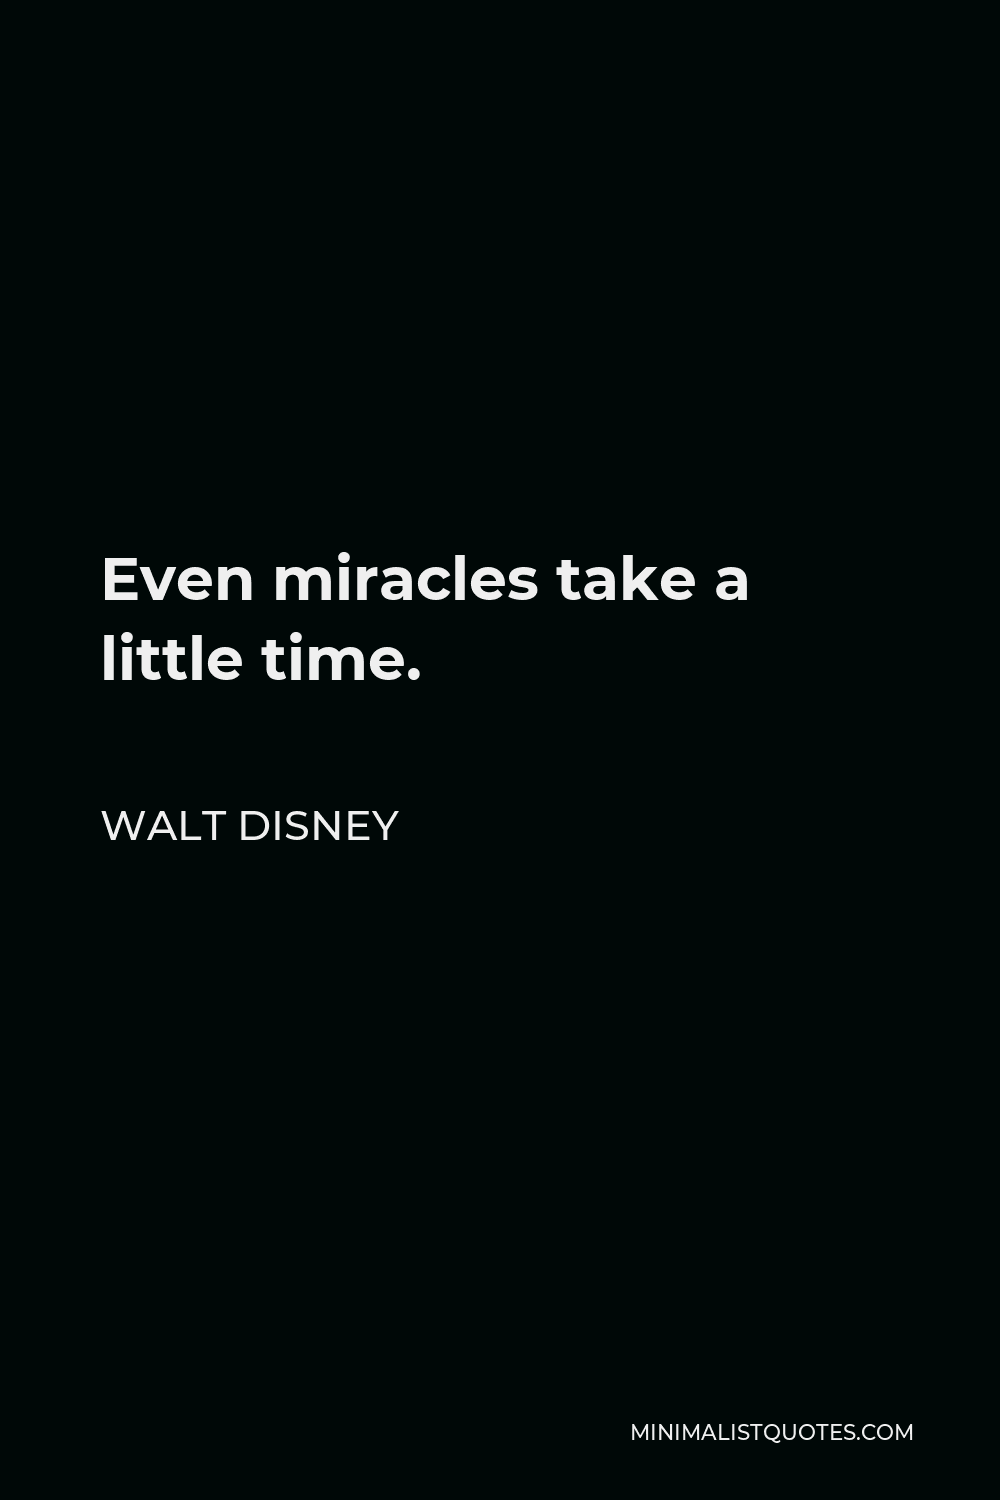 Walt Disney Quote: Even miracles take a little time.